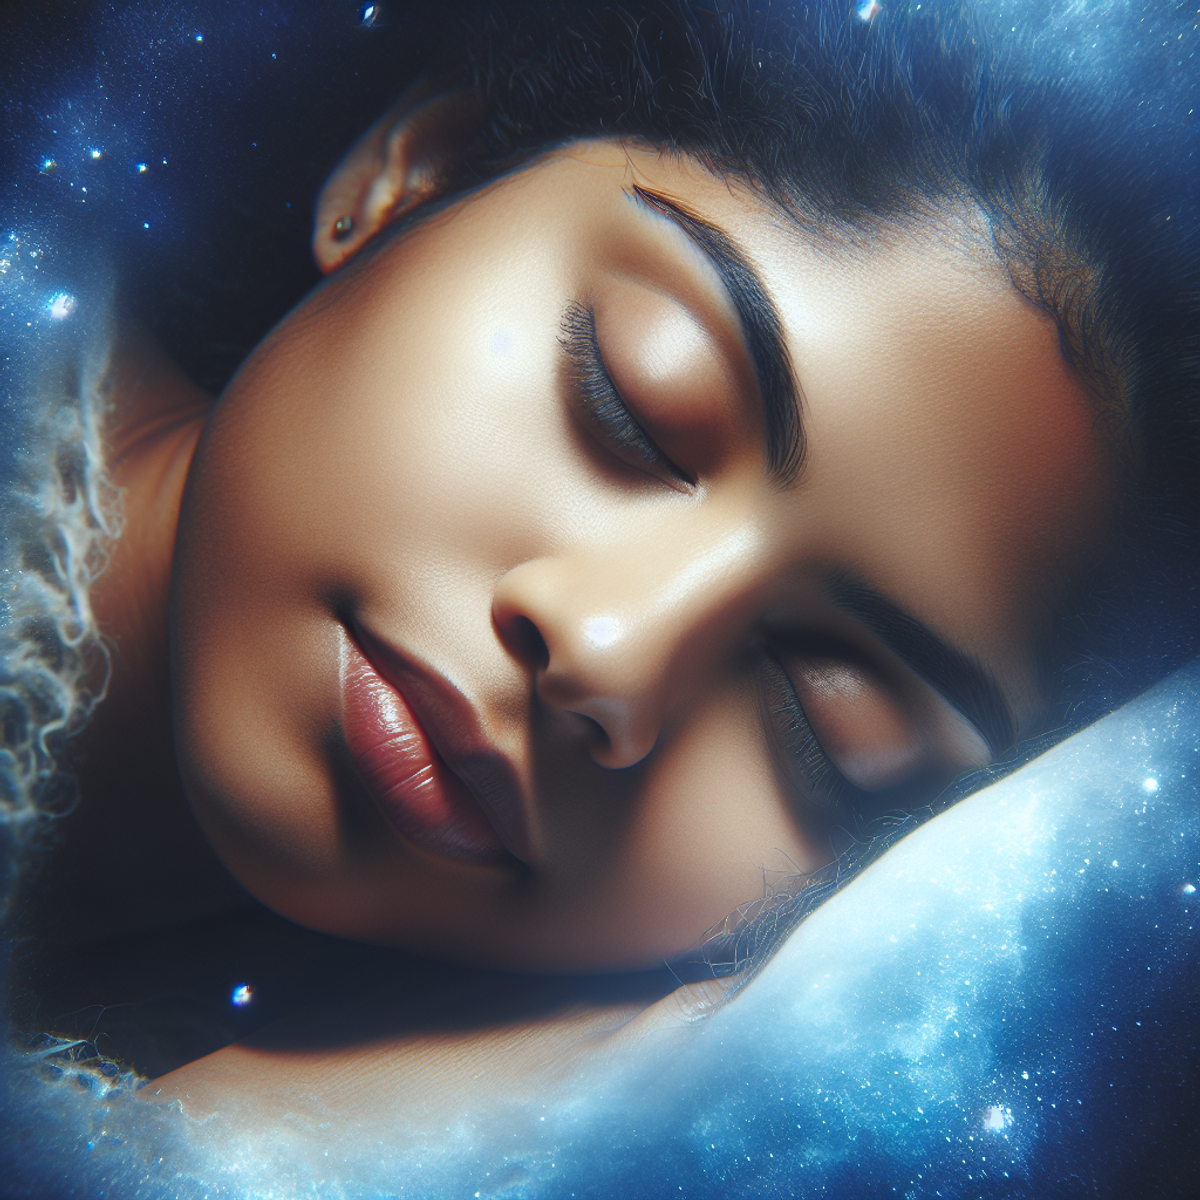 A close-up image of a sleeping Hispanic woman with a peaceful expression on her face, enveloped by a soft glow of moonlight.